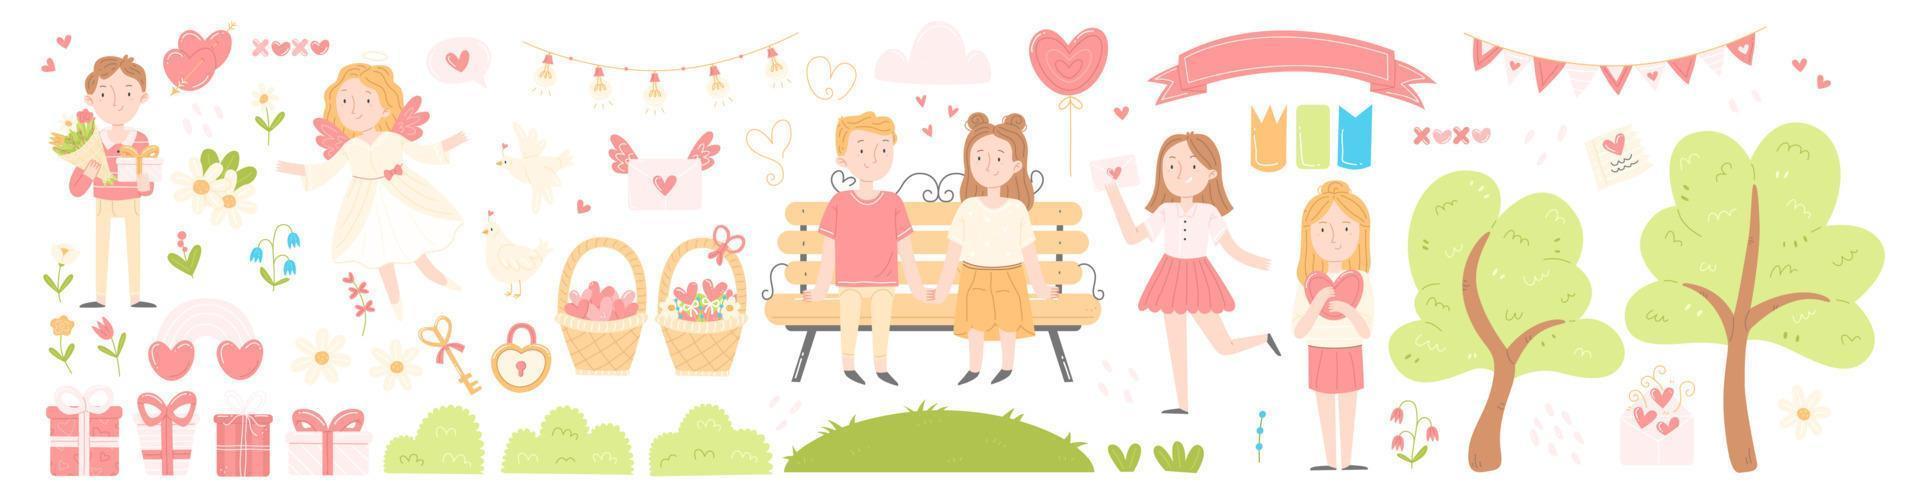 A set of cute cartoon Valentine's day elements. Day of love vector isolated illustration. Characters in love, heart, gift, love letter, date.